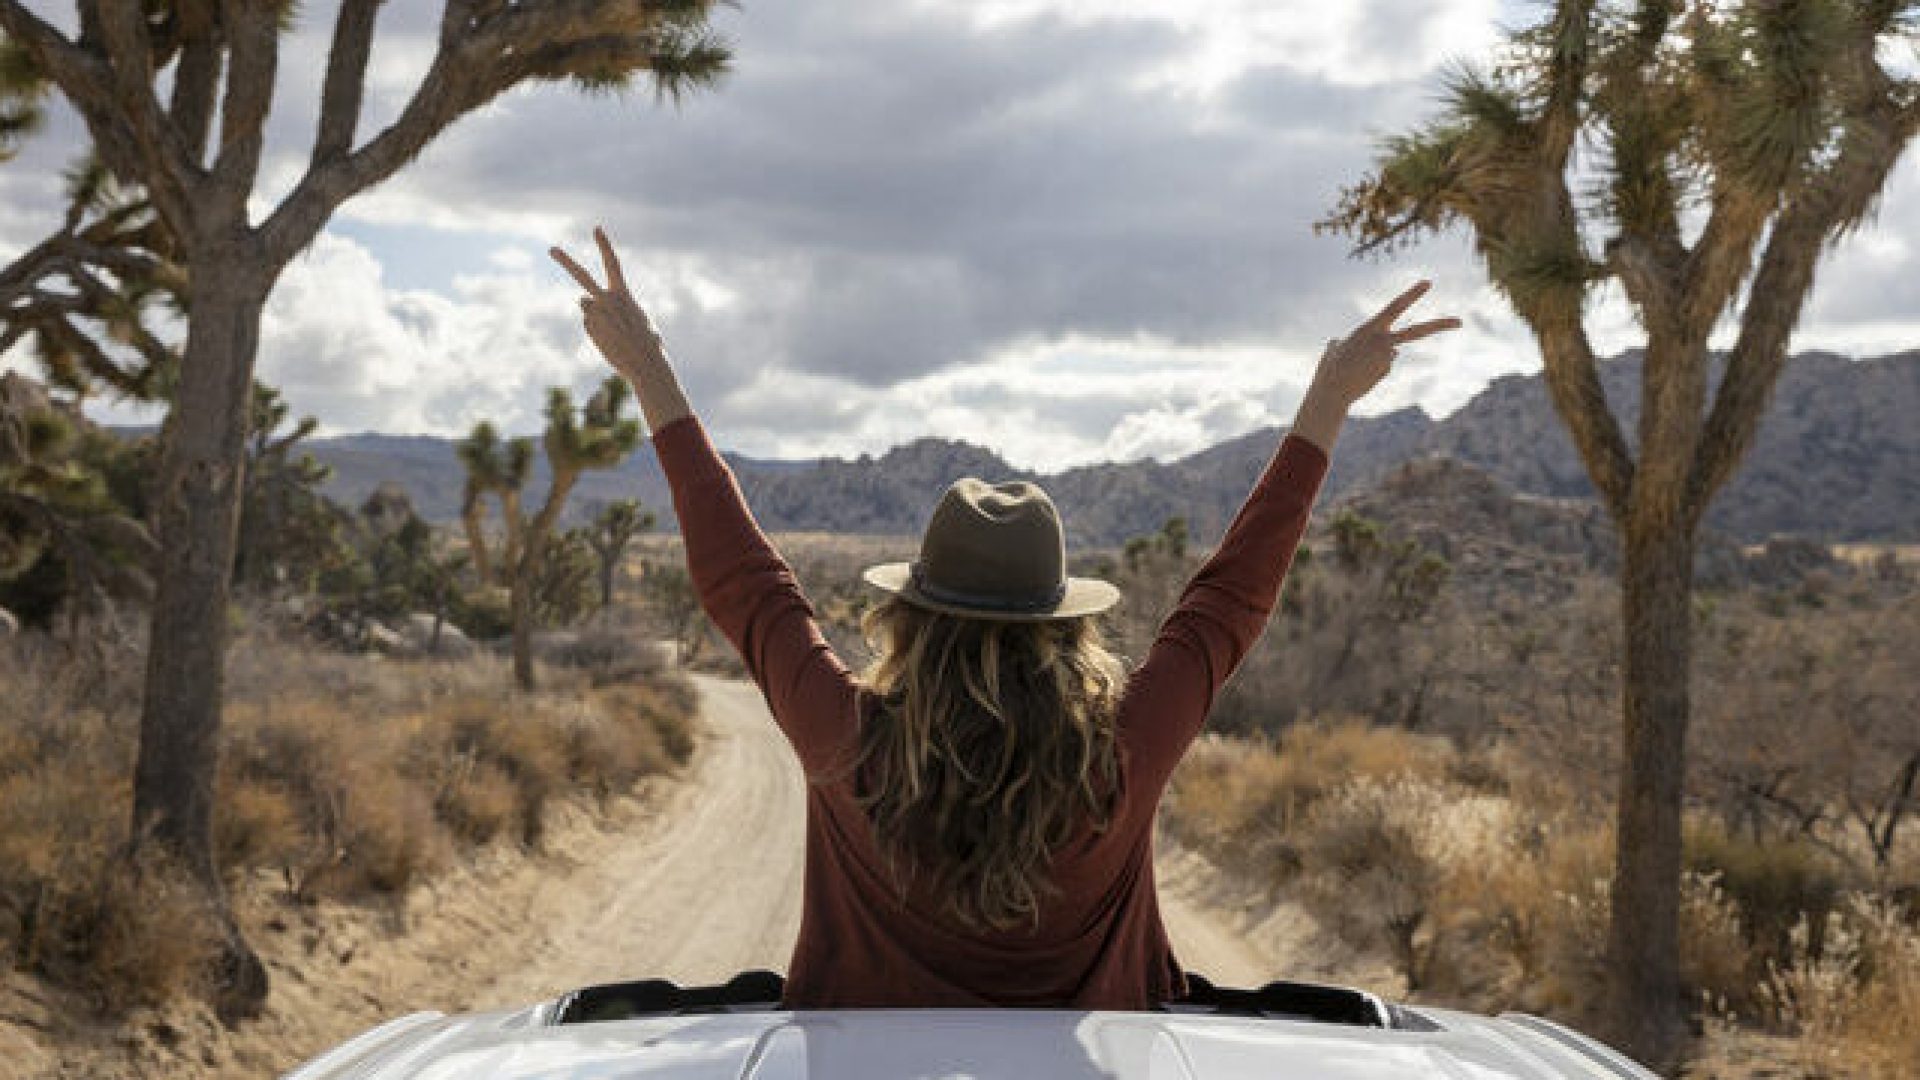 A woman out the sunroof of her car taking in the beautiful scene in Joshua Tree.